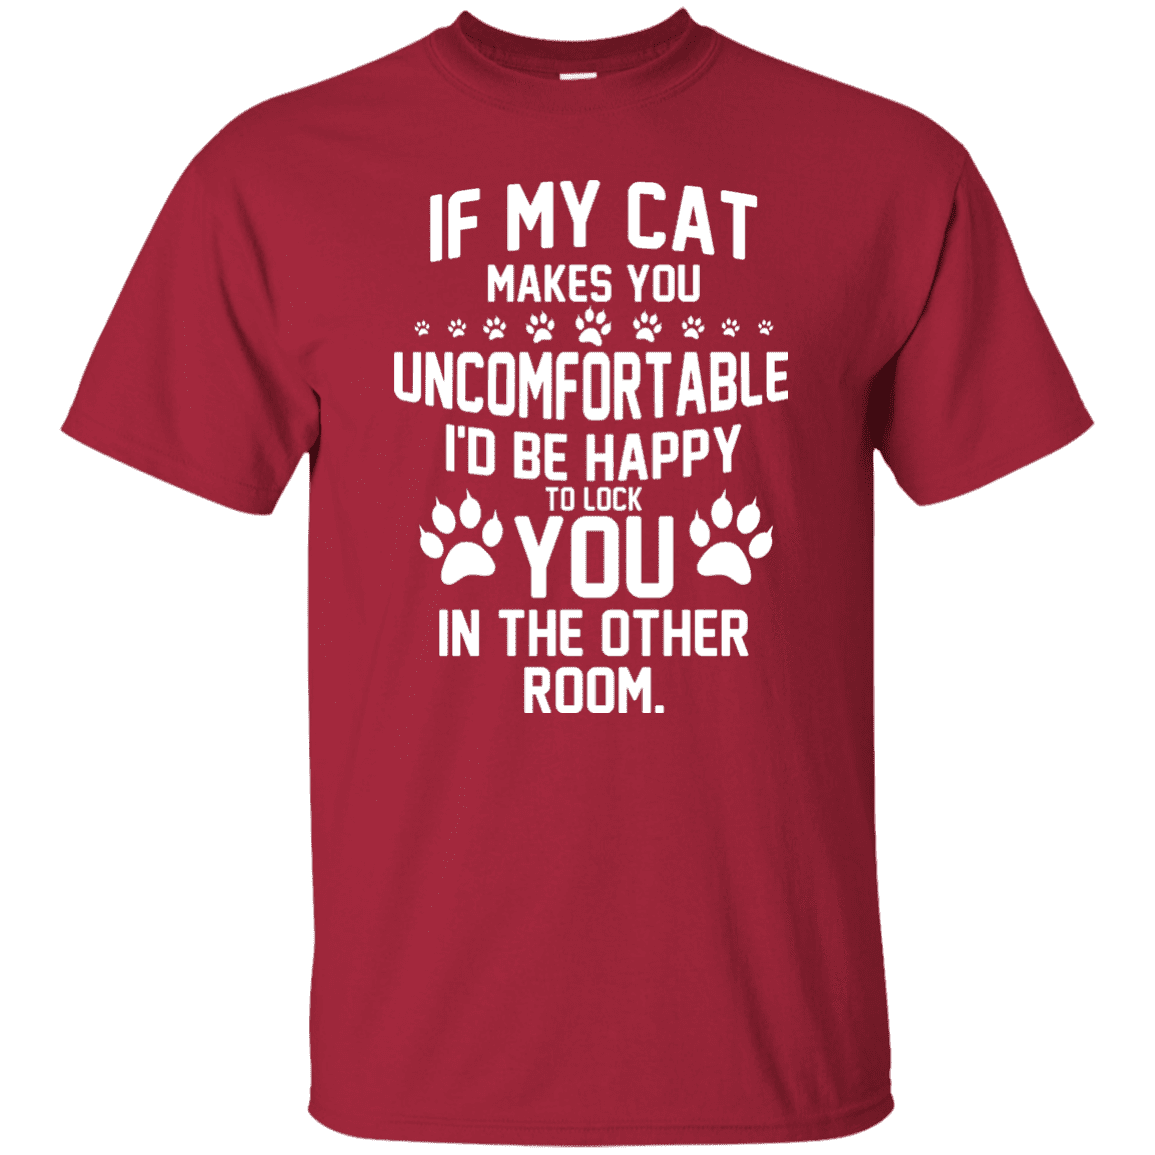 If My Cat Makes You Uncomfortable - T Shirt.